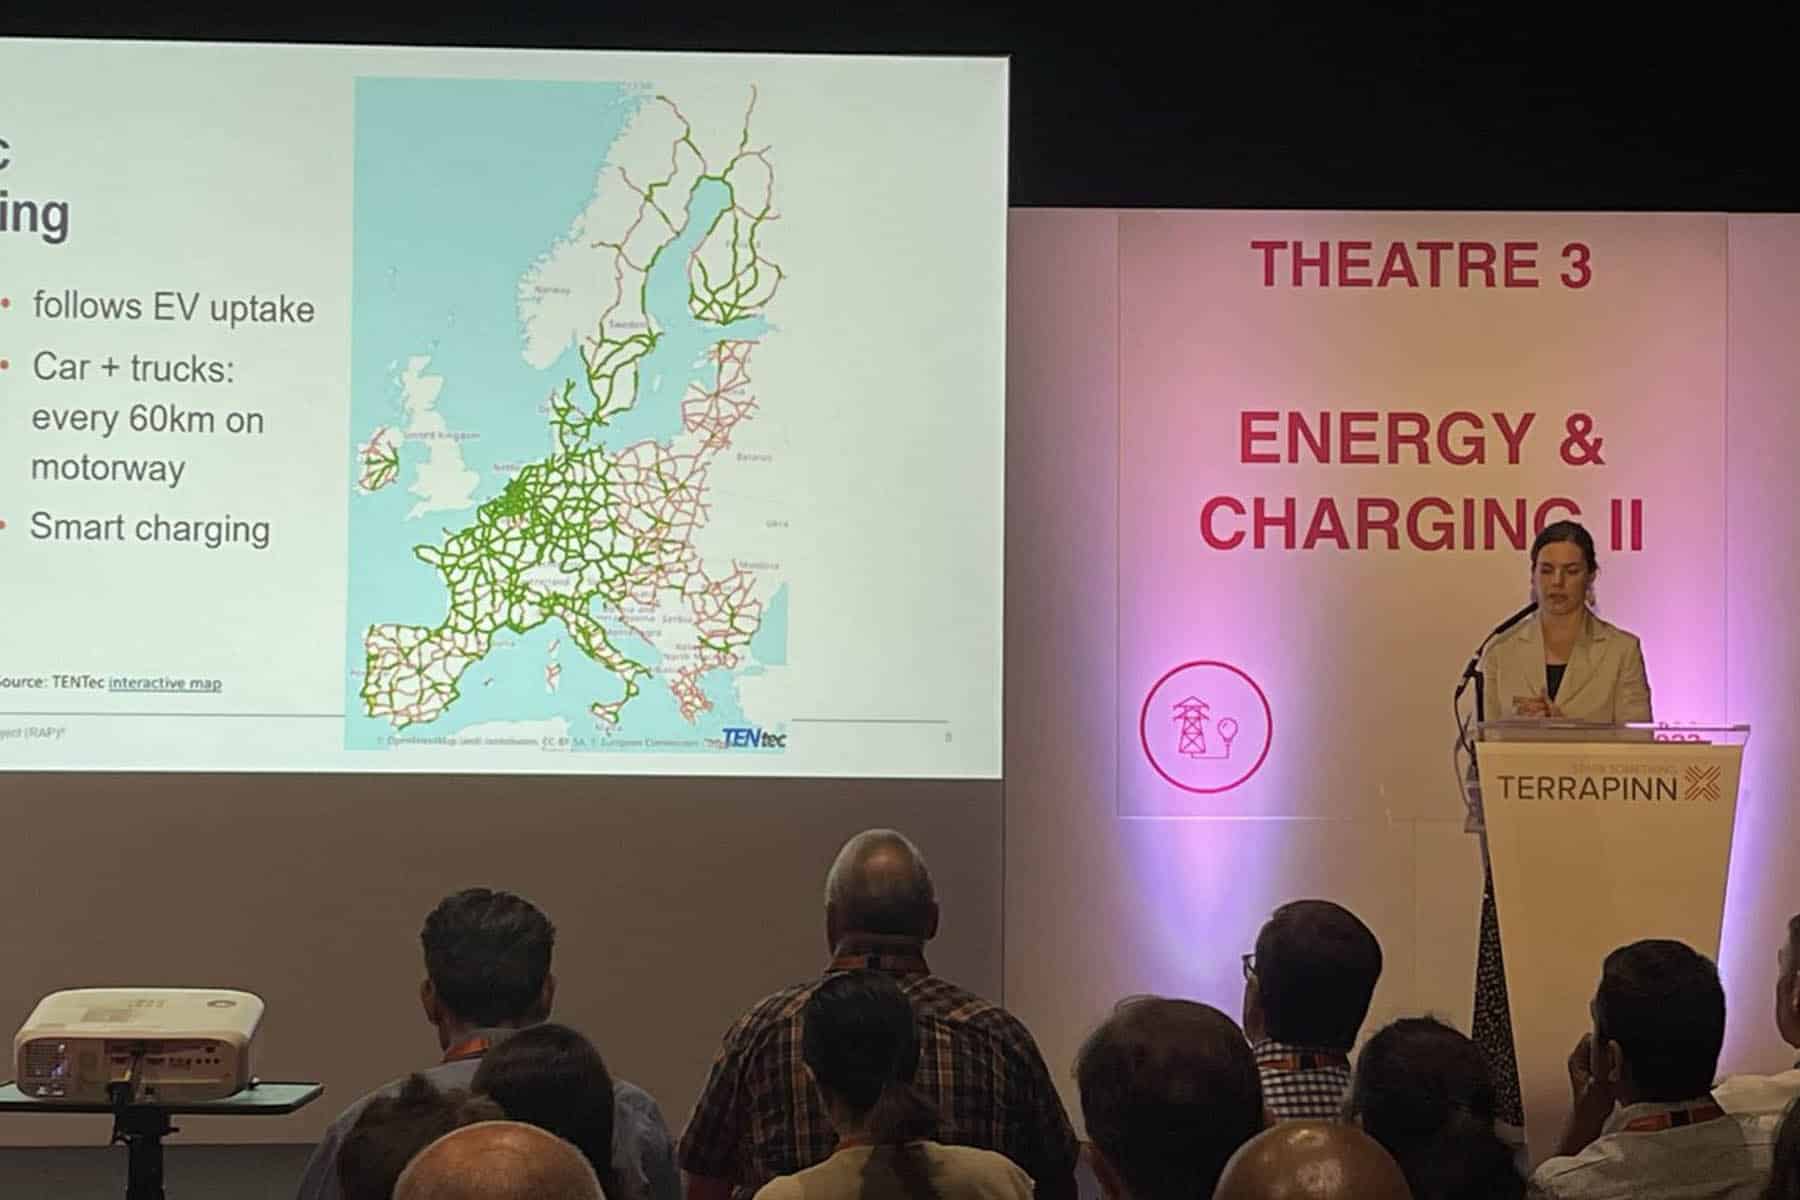 A woman with light toned skin stands are a podium in front of a group. To the left of frame is a screen projection of a map of Europe. In red letters on the wall behind her are the words "Energy & Charging II".